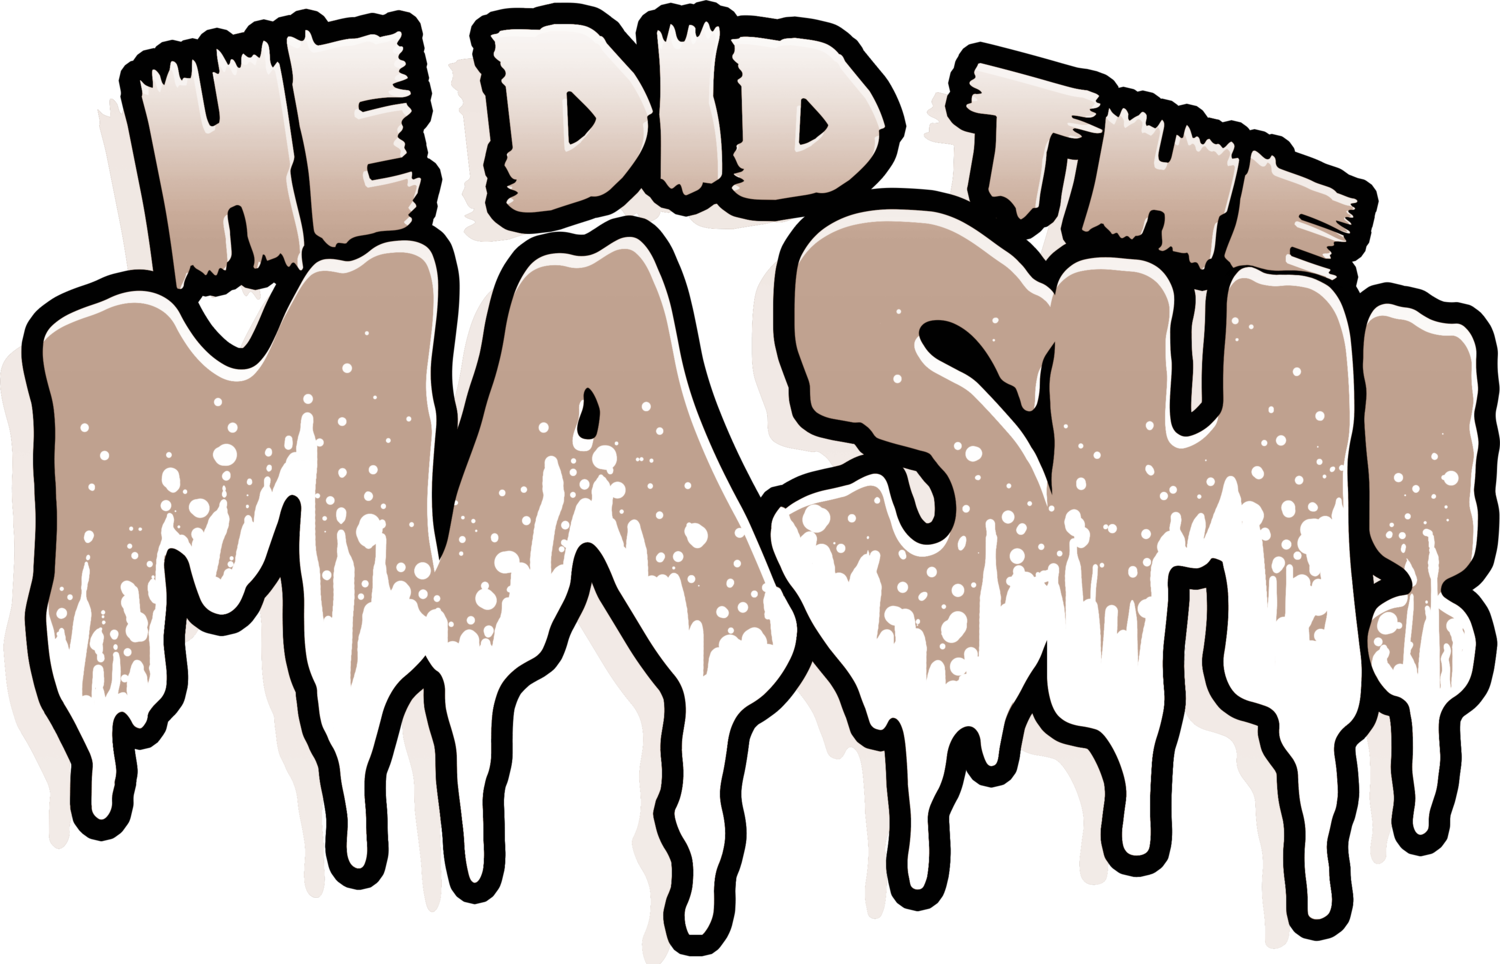 He Did The Mash!